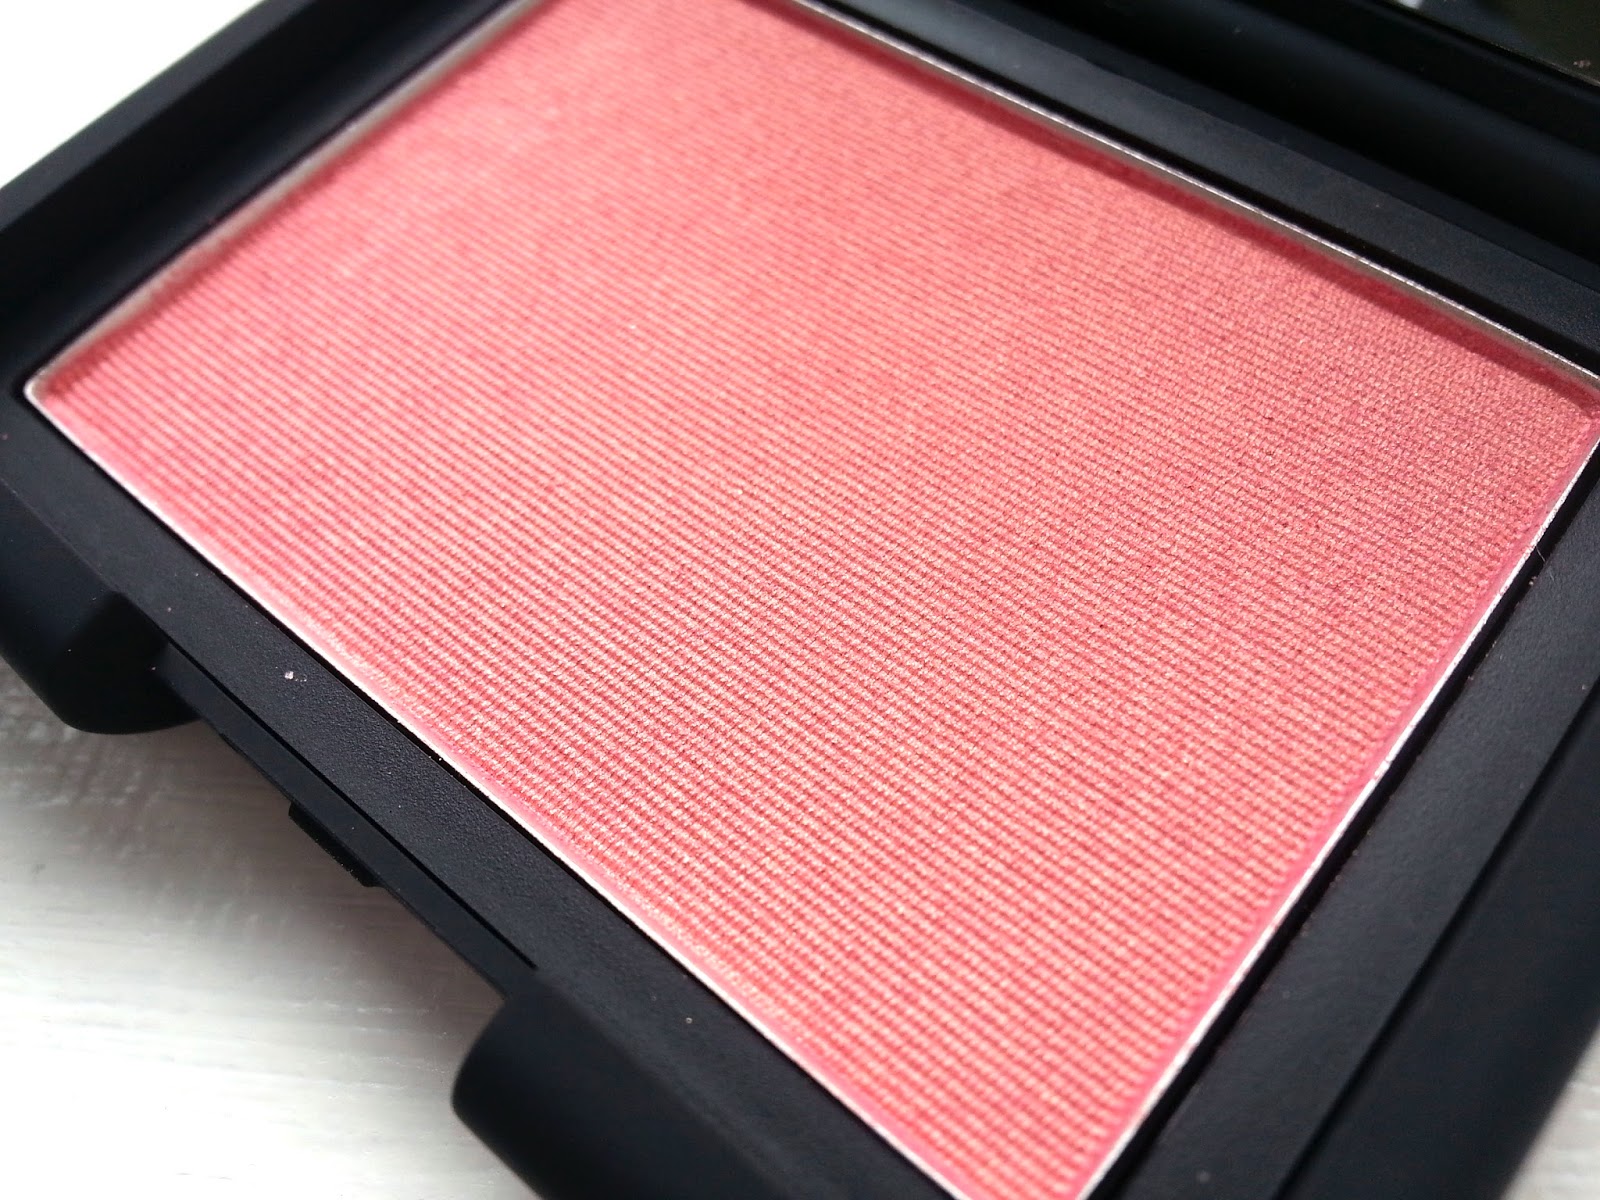 NARS Orgasm Blush Swatches and Review